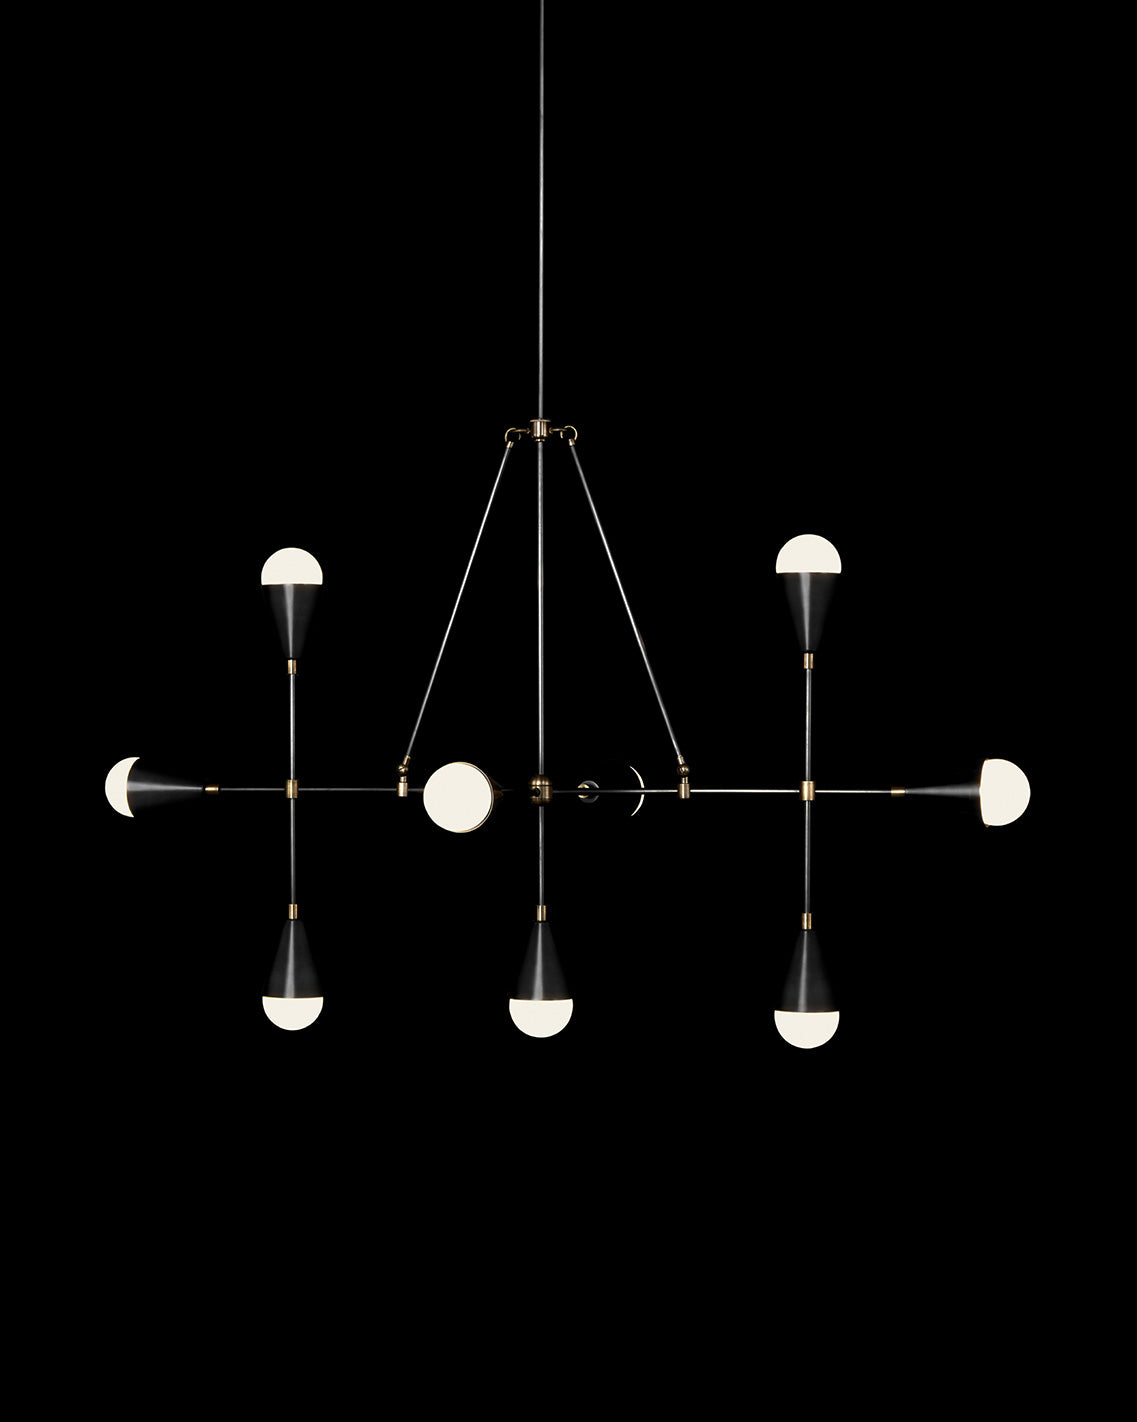 TRIAD : 9 LINEAR ceiling pendant in Blackened Brass and Aged Brass finish, hanging against a black background. 